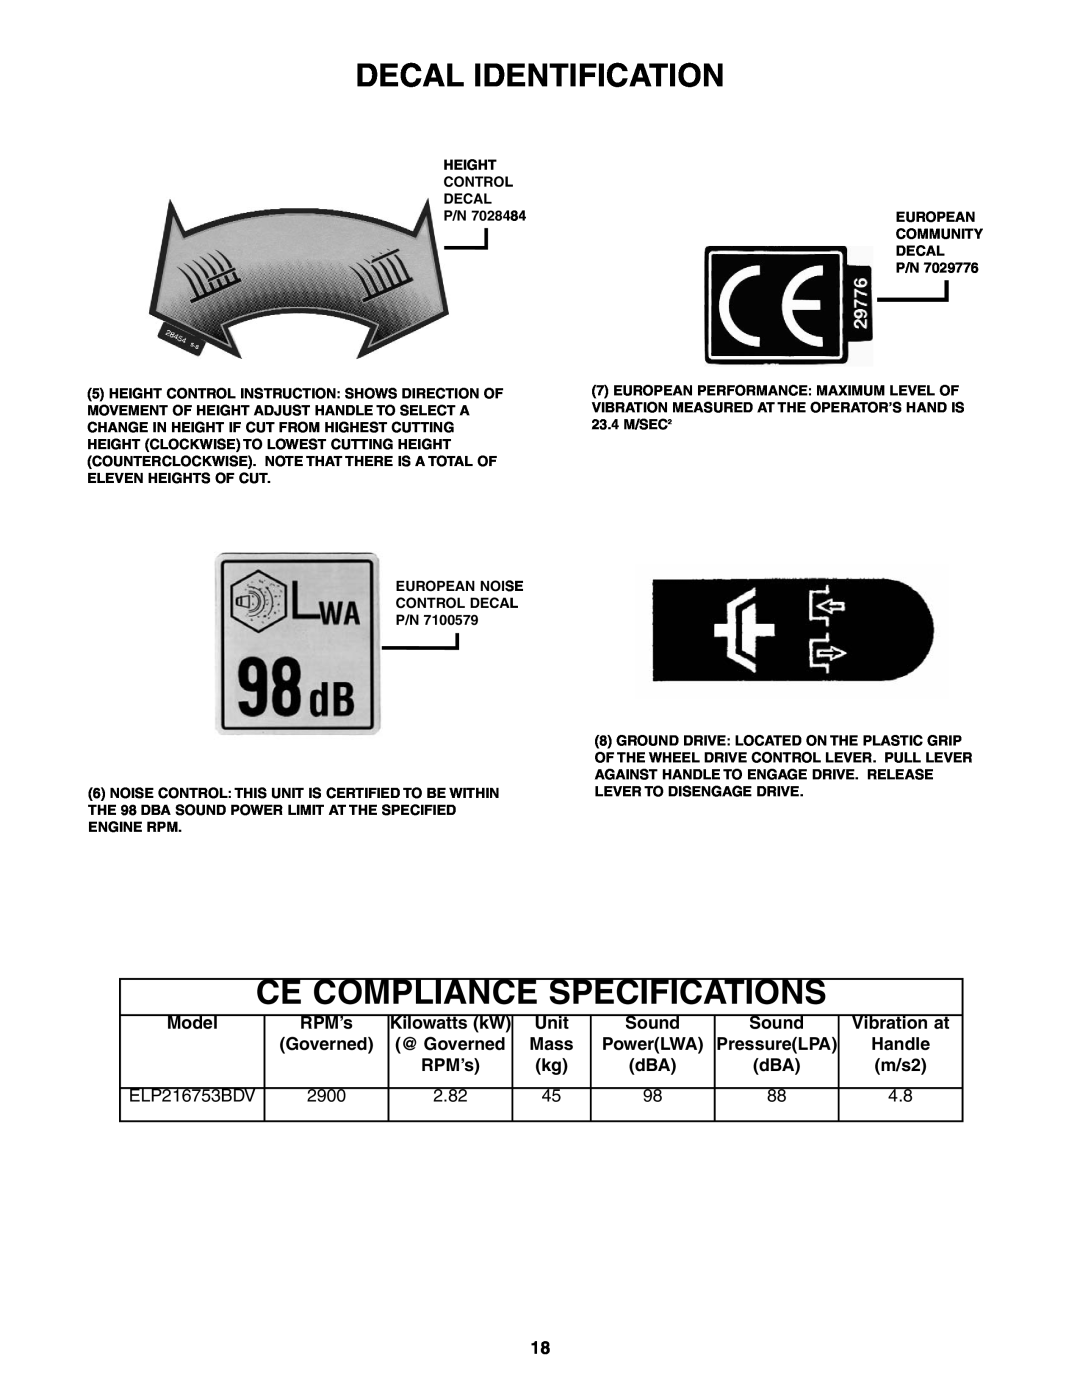 Snapper ELP216753BDV specifications Ce Compliance Specifications, Decal Identification, Vibration at, PowerLWA 